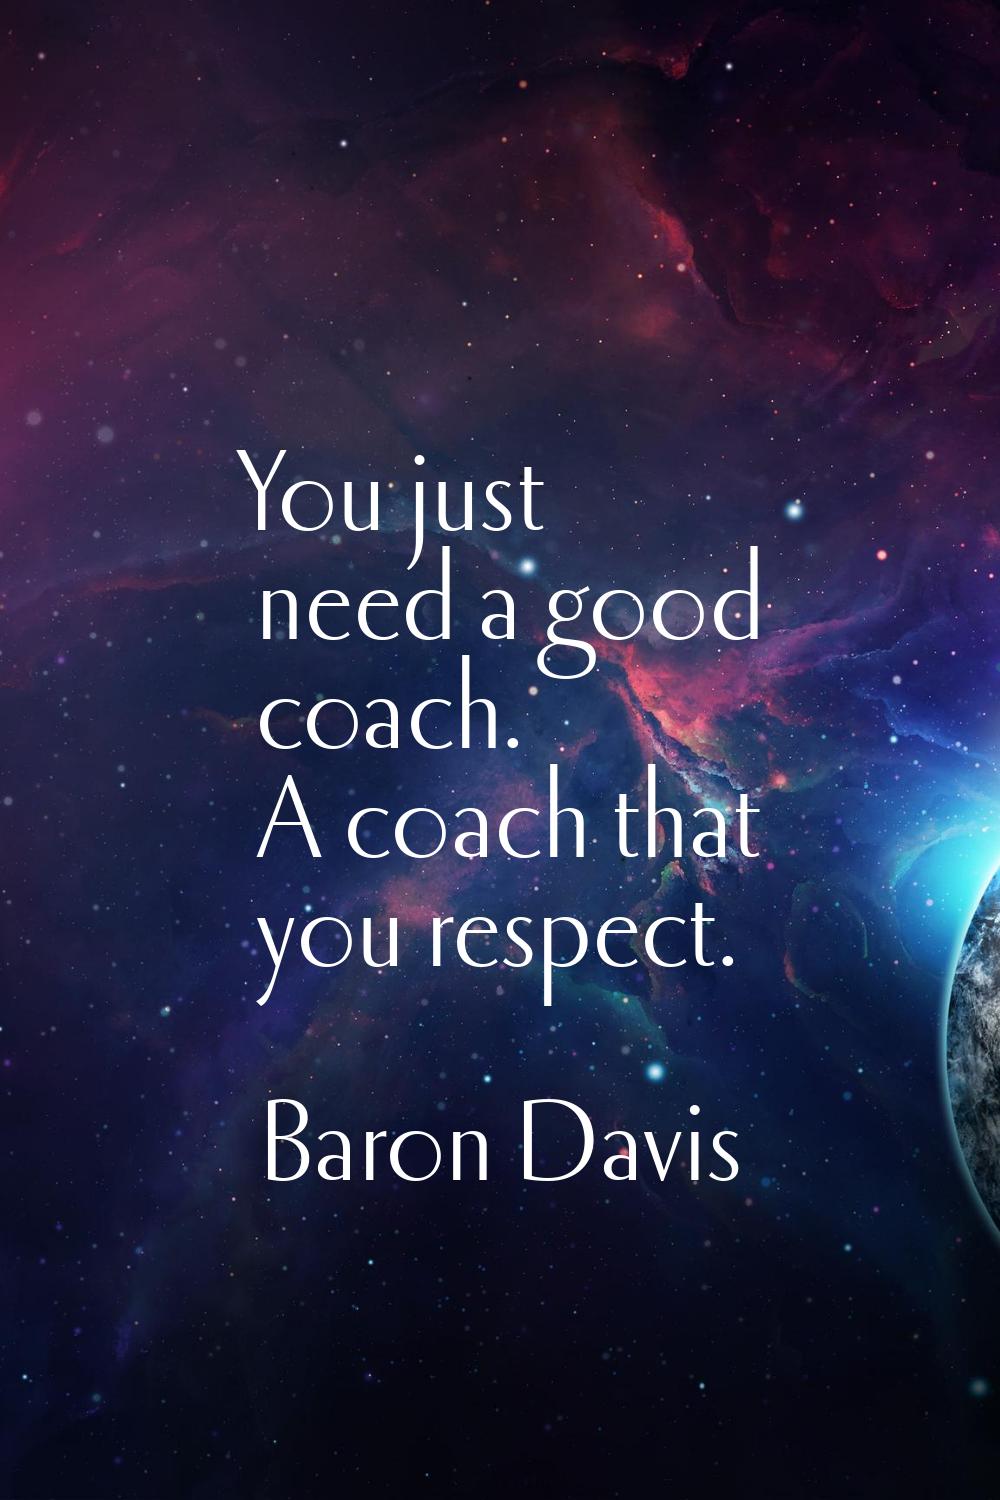 You just need a good coach. A coach that you respect.